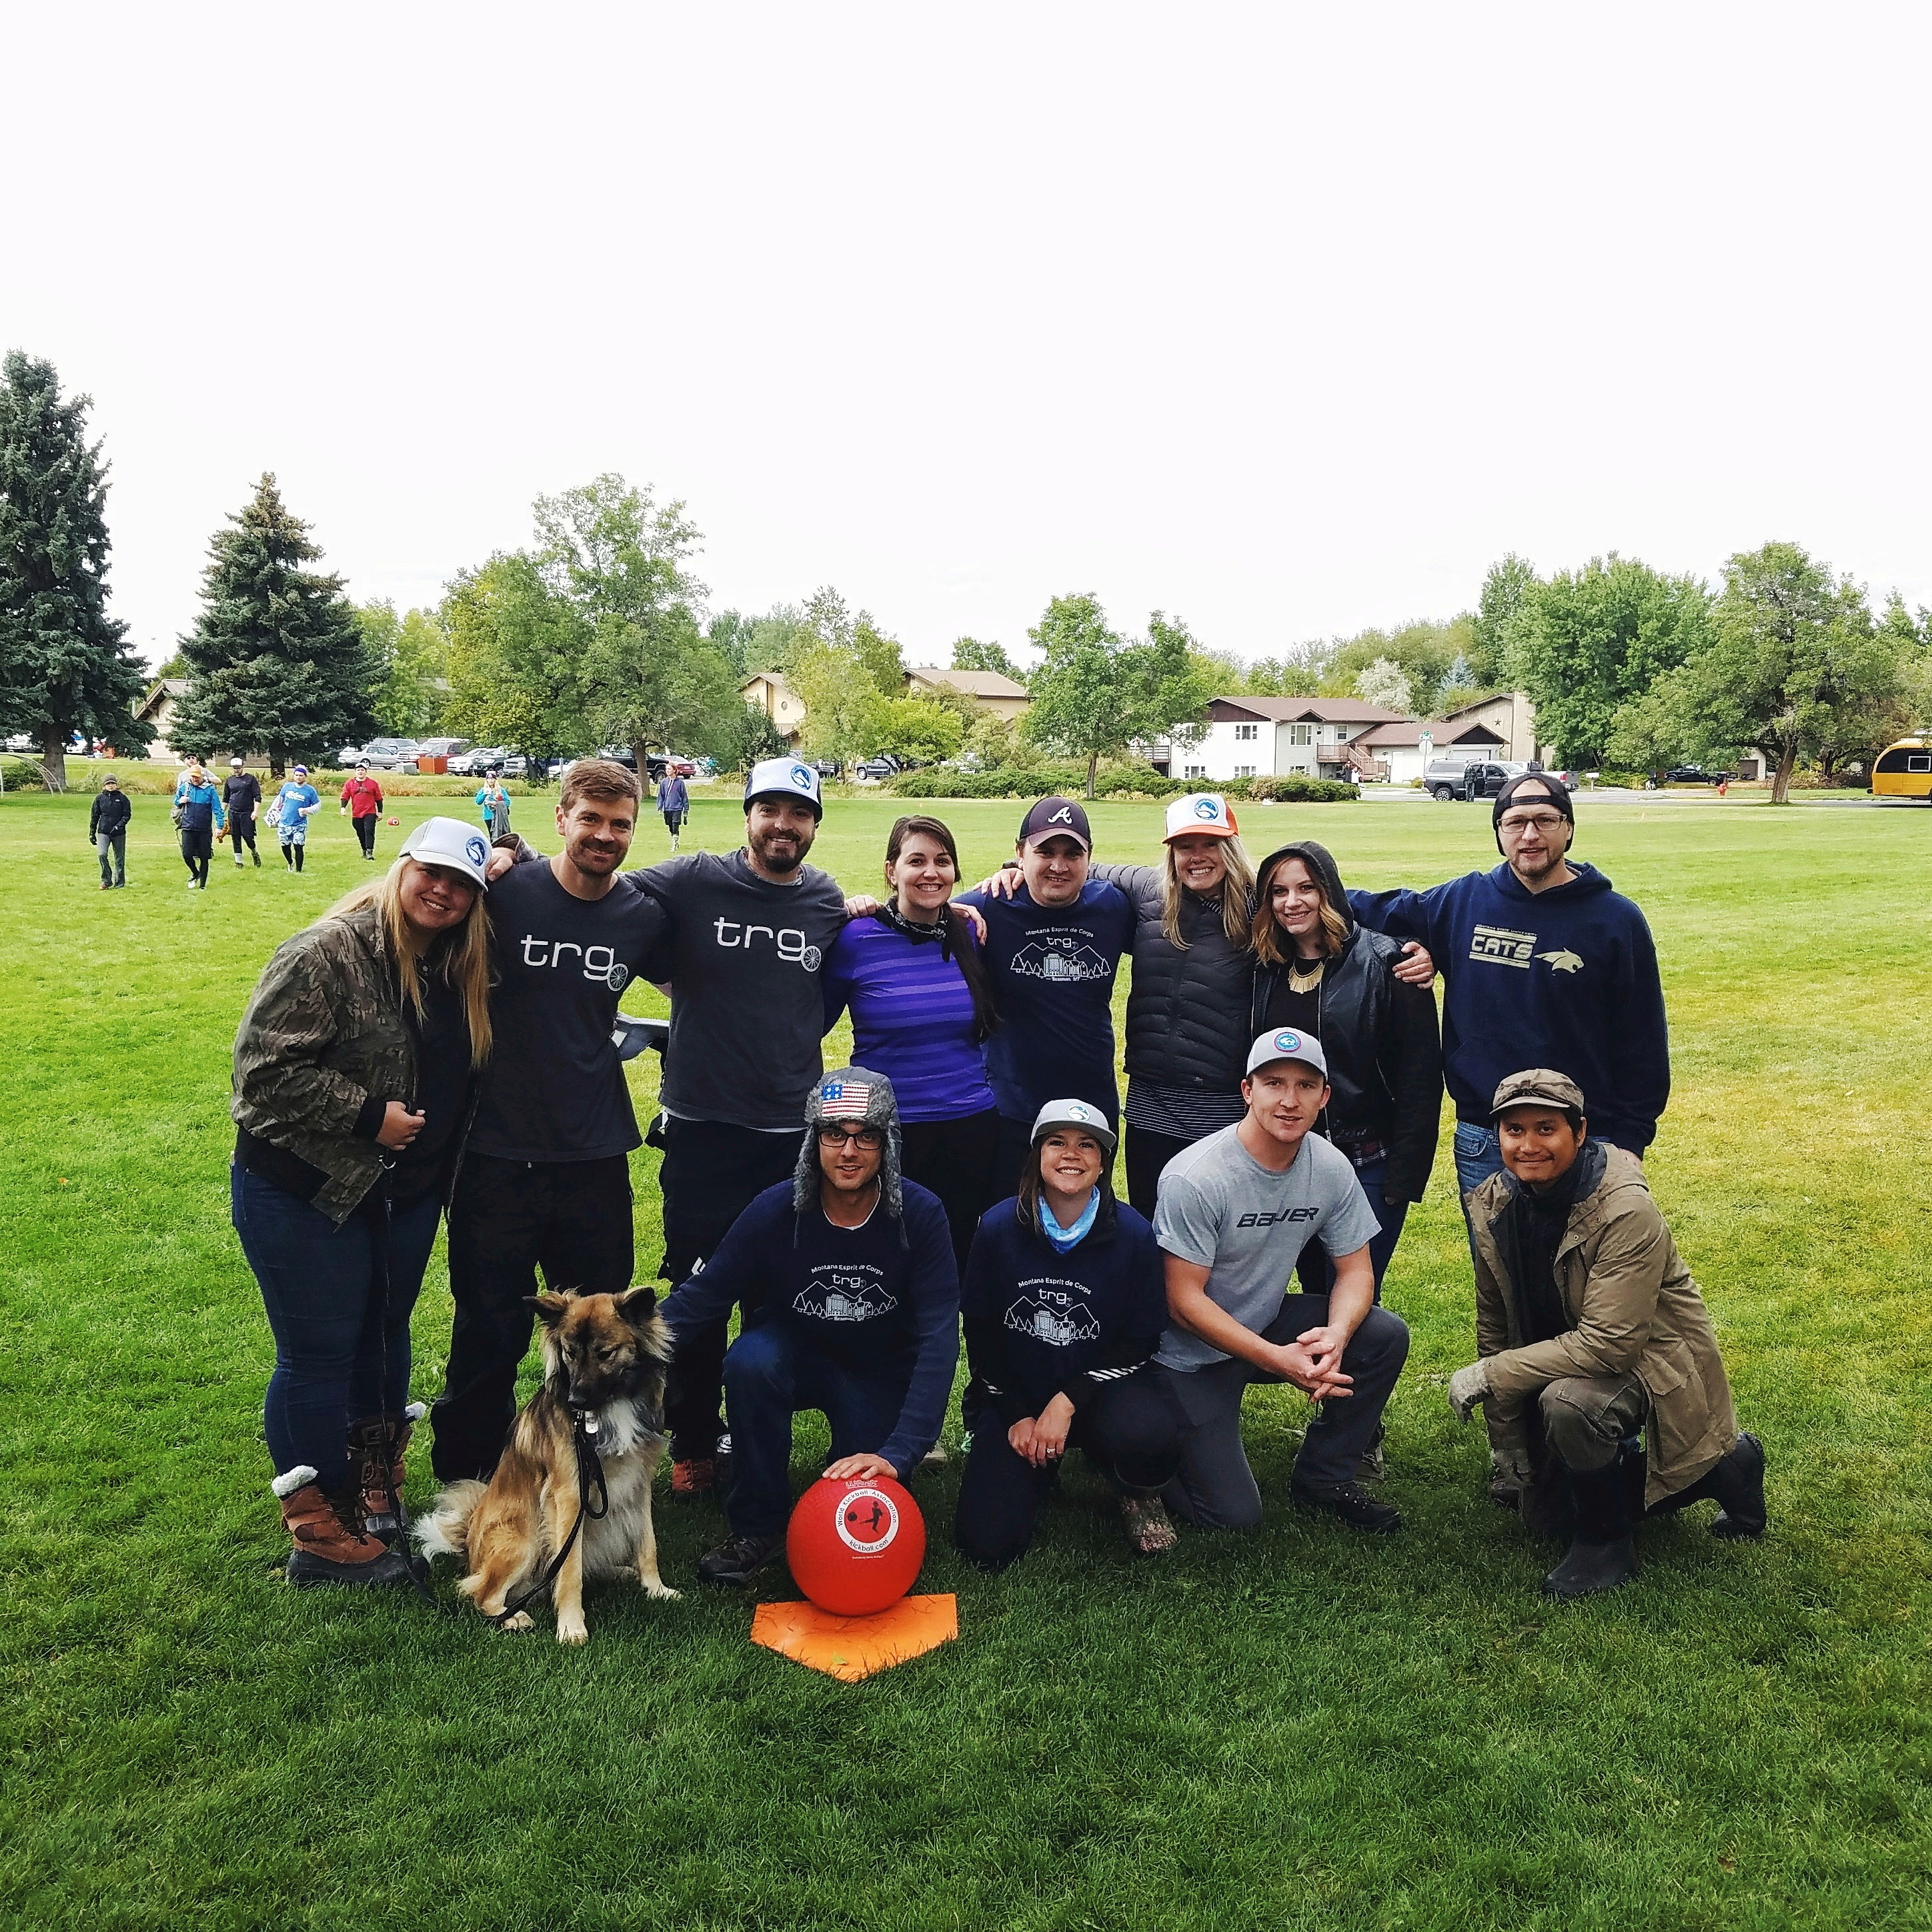 The Trade Risk Guaranty team joins the fundraising kickball tournament organized by Big Sky Youth Empowerment.